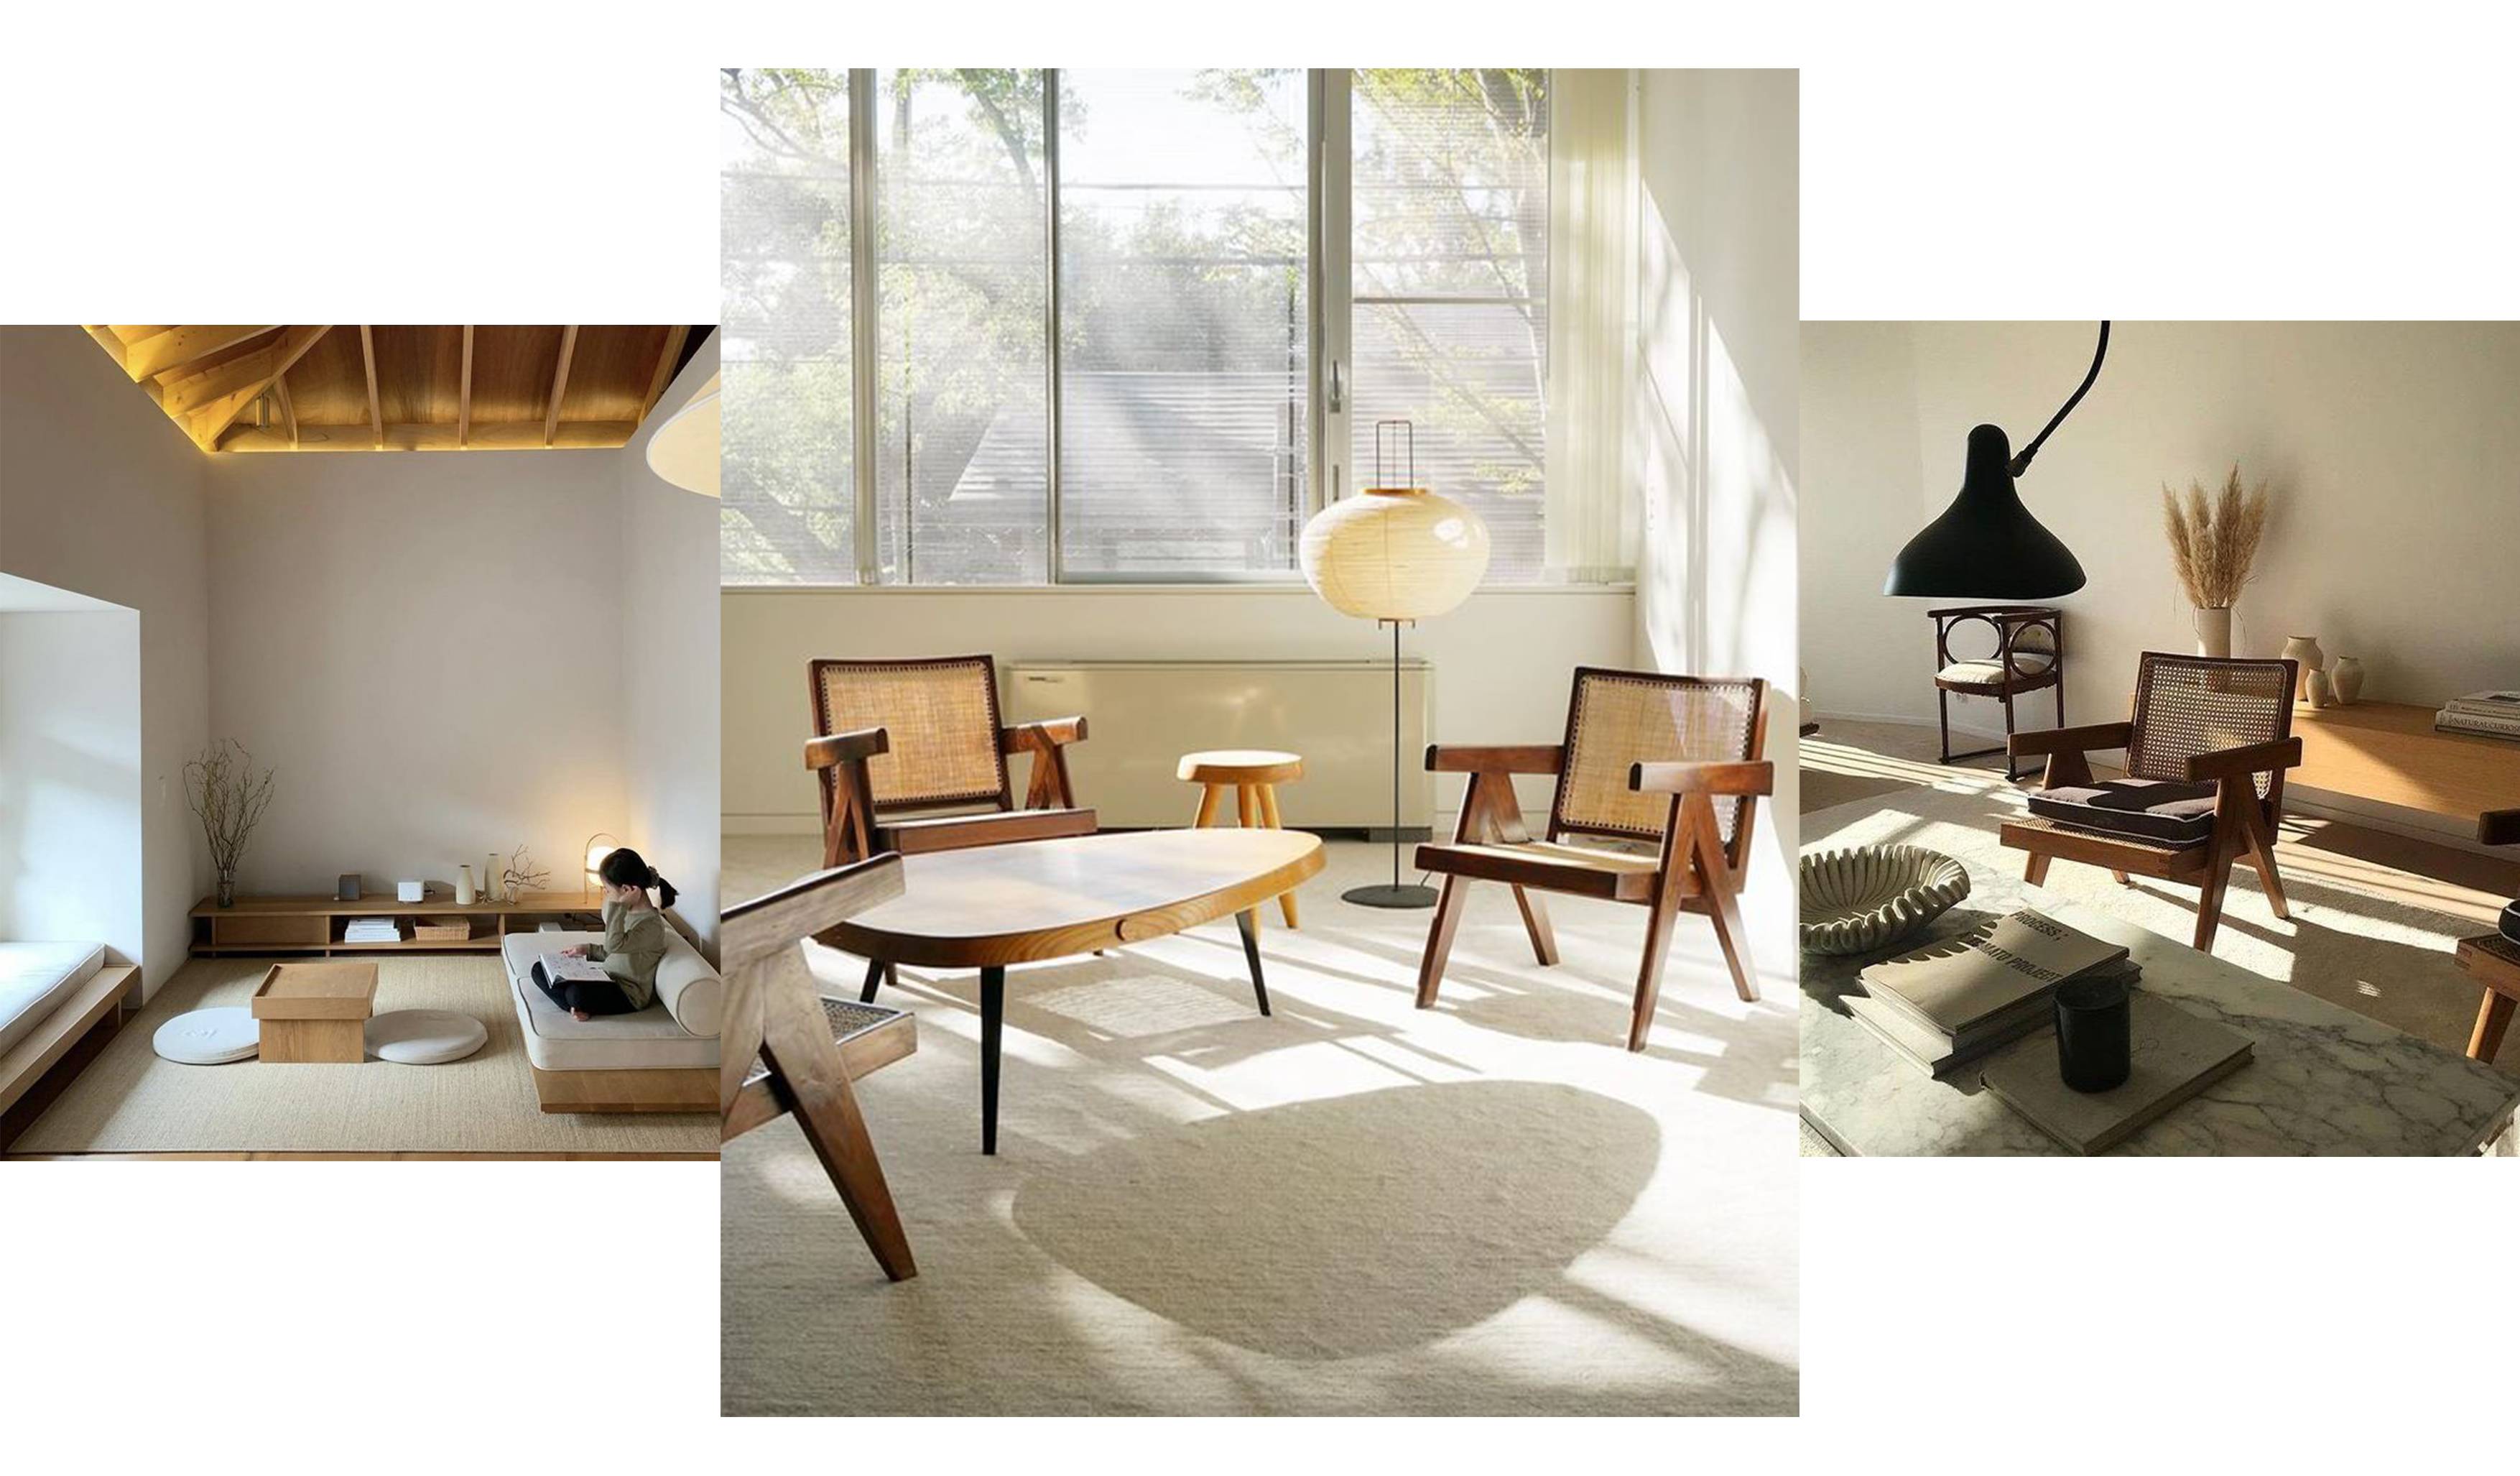 Korean Furniture: A Perfect Blend of Aesthetic and Functionality